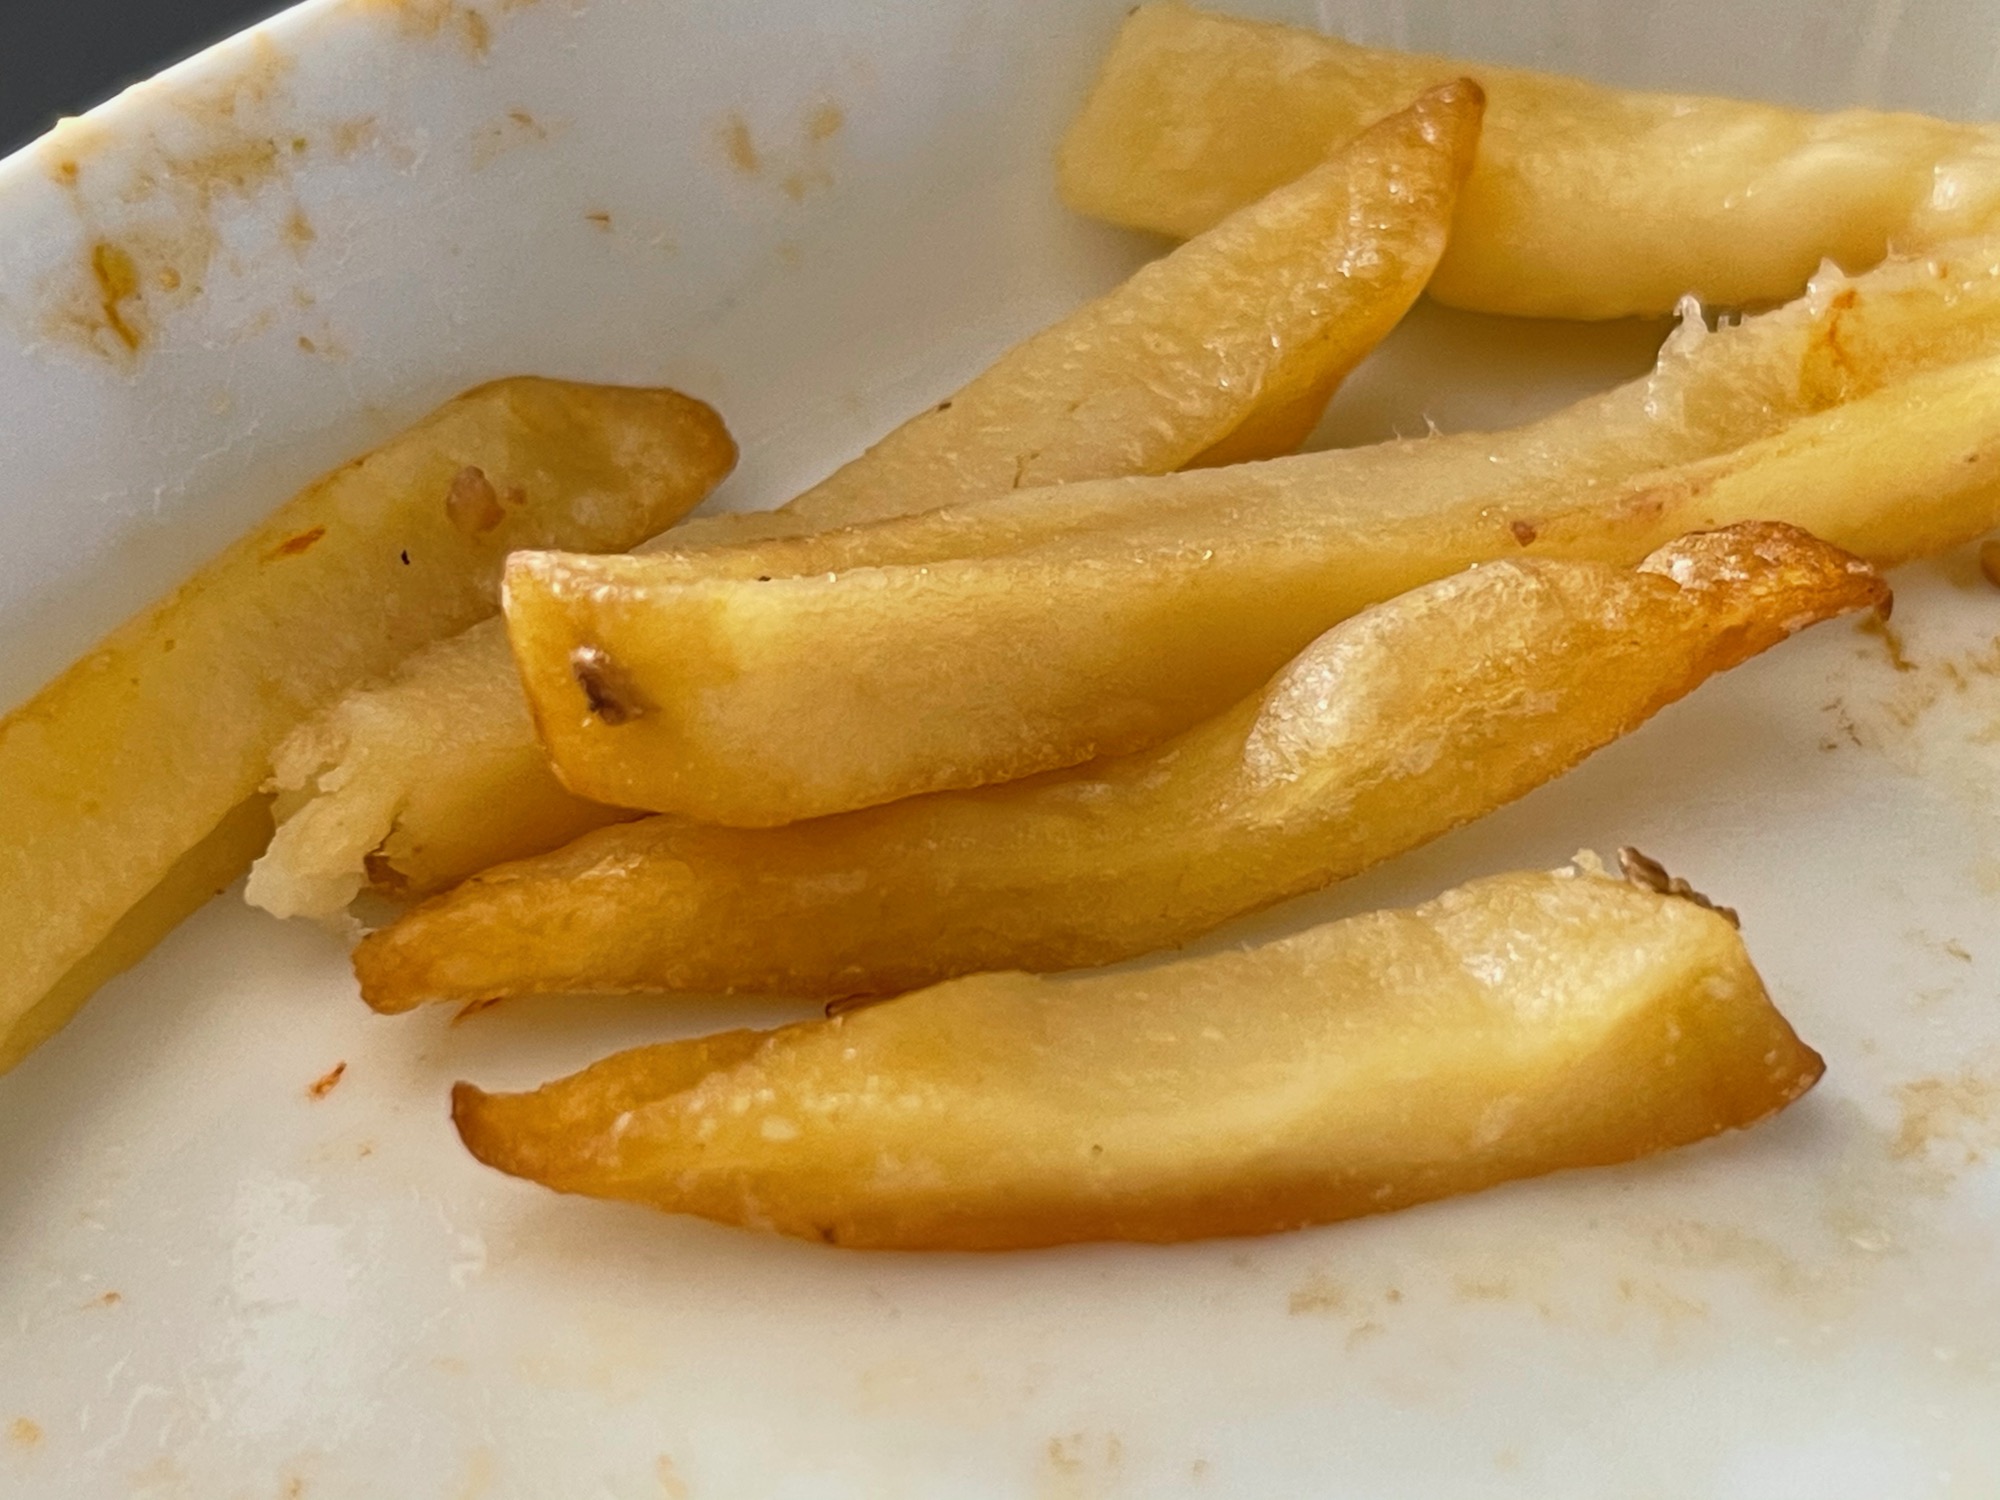 a plate of french fries